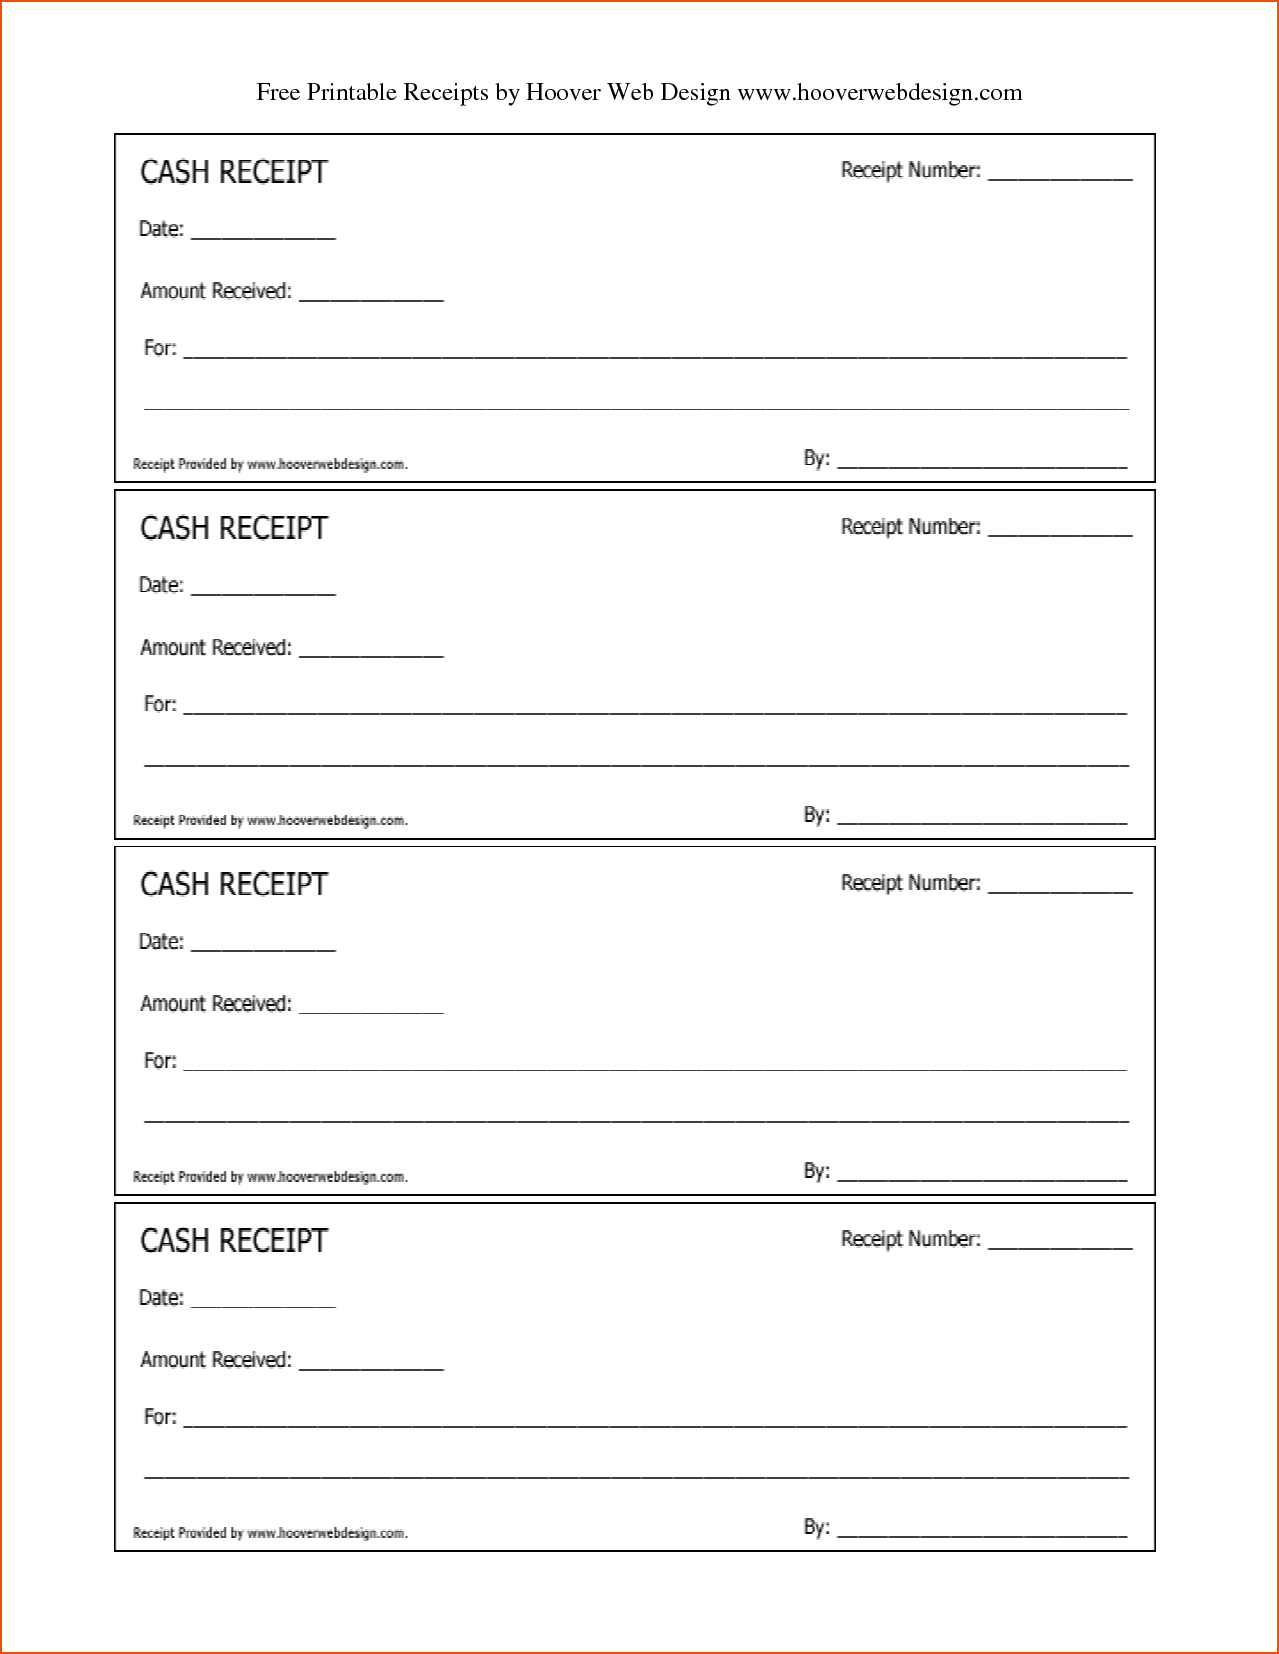 Free Printable Receipts For Services Feedback Templates Personal - Free Printable Daycare Receipts